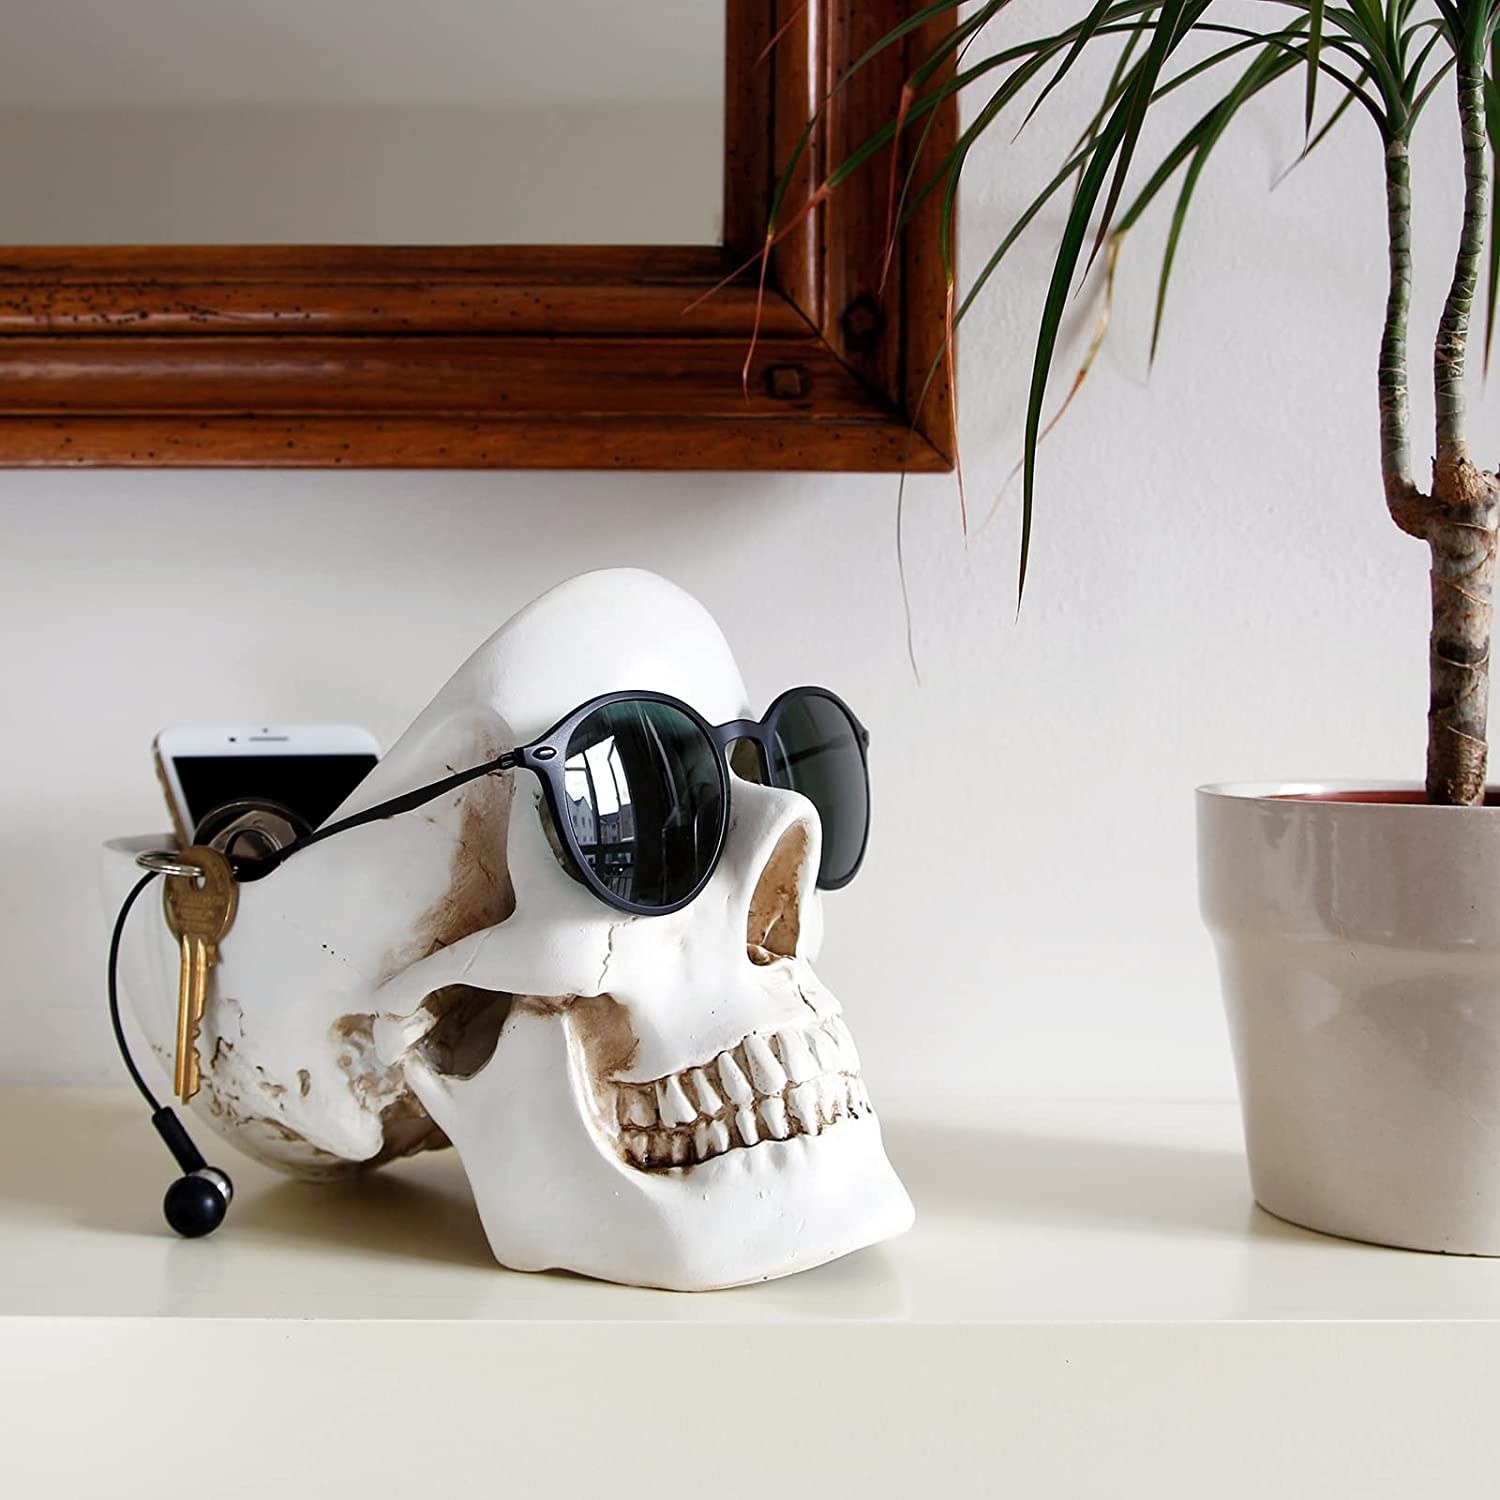 a skull trinkets dish with sunglasses, keys, and a phone in it